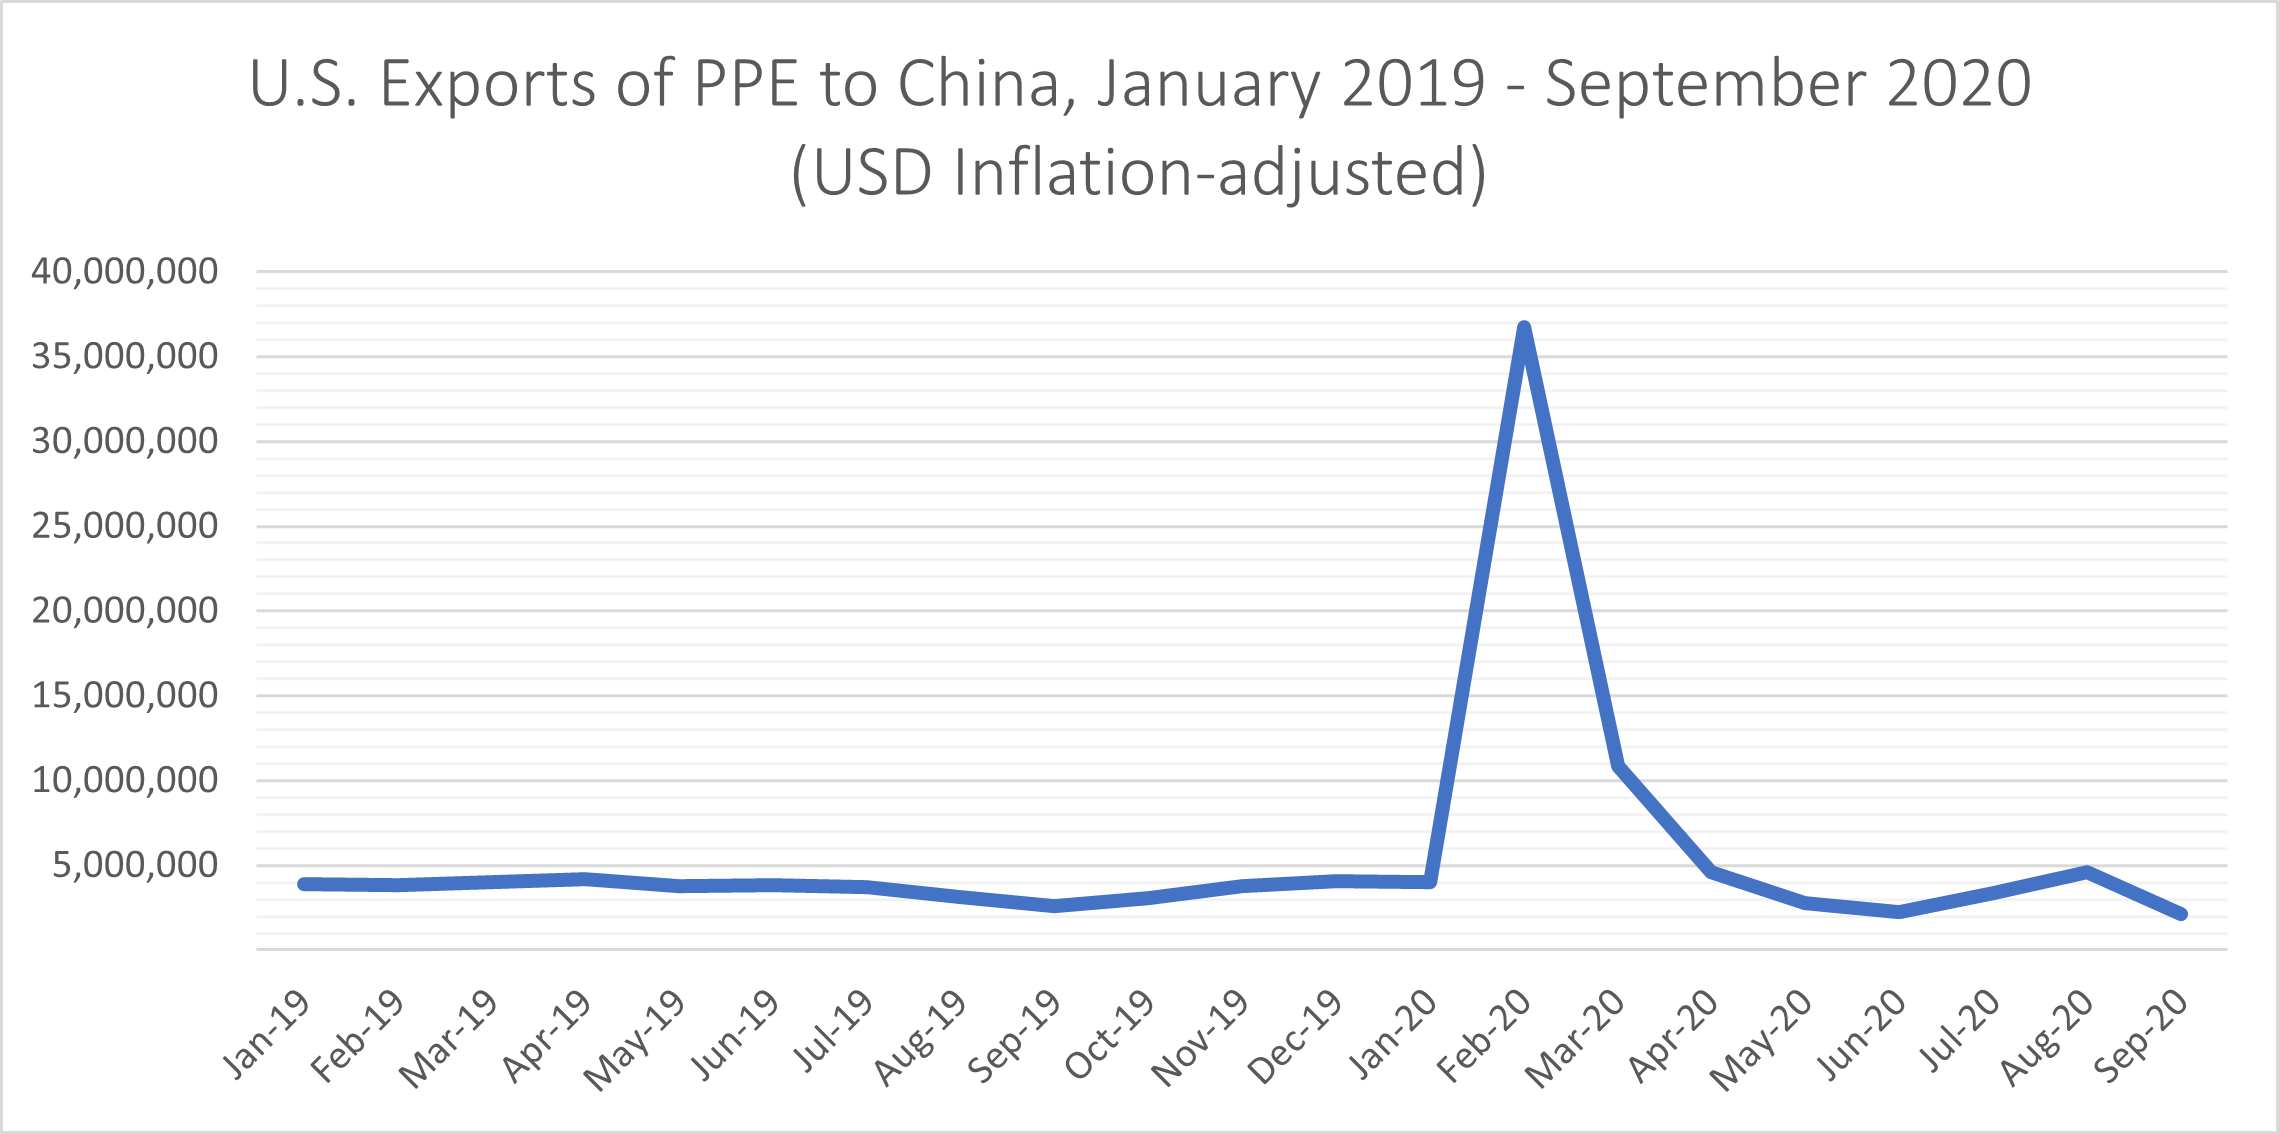 U.S. EXPORTS OF PPE TO CHINA BY MONTH